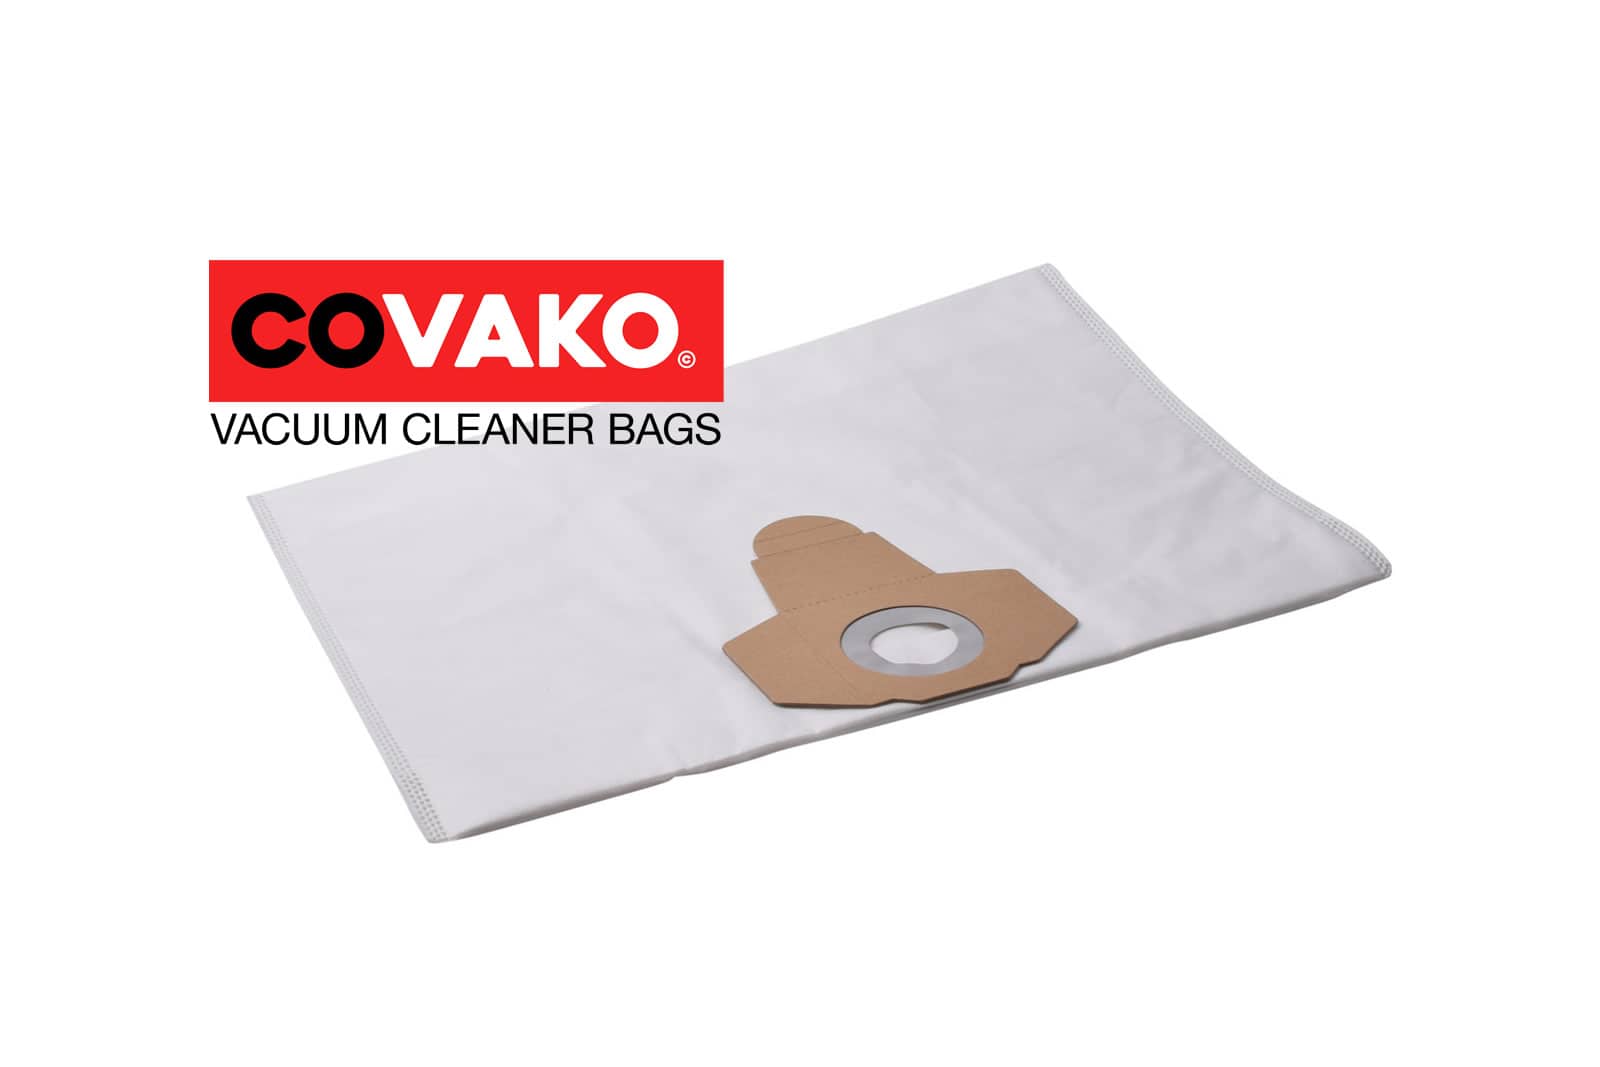 AquaVac Excell 20 S EDS / Synthesis - AquaVac vacuum cleaner bags